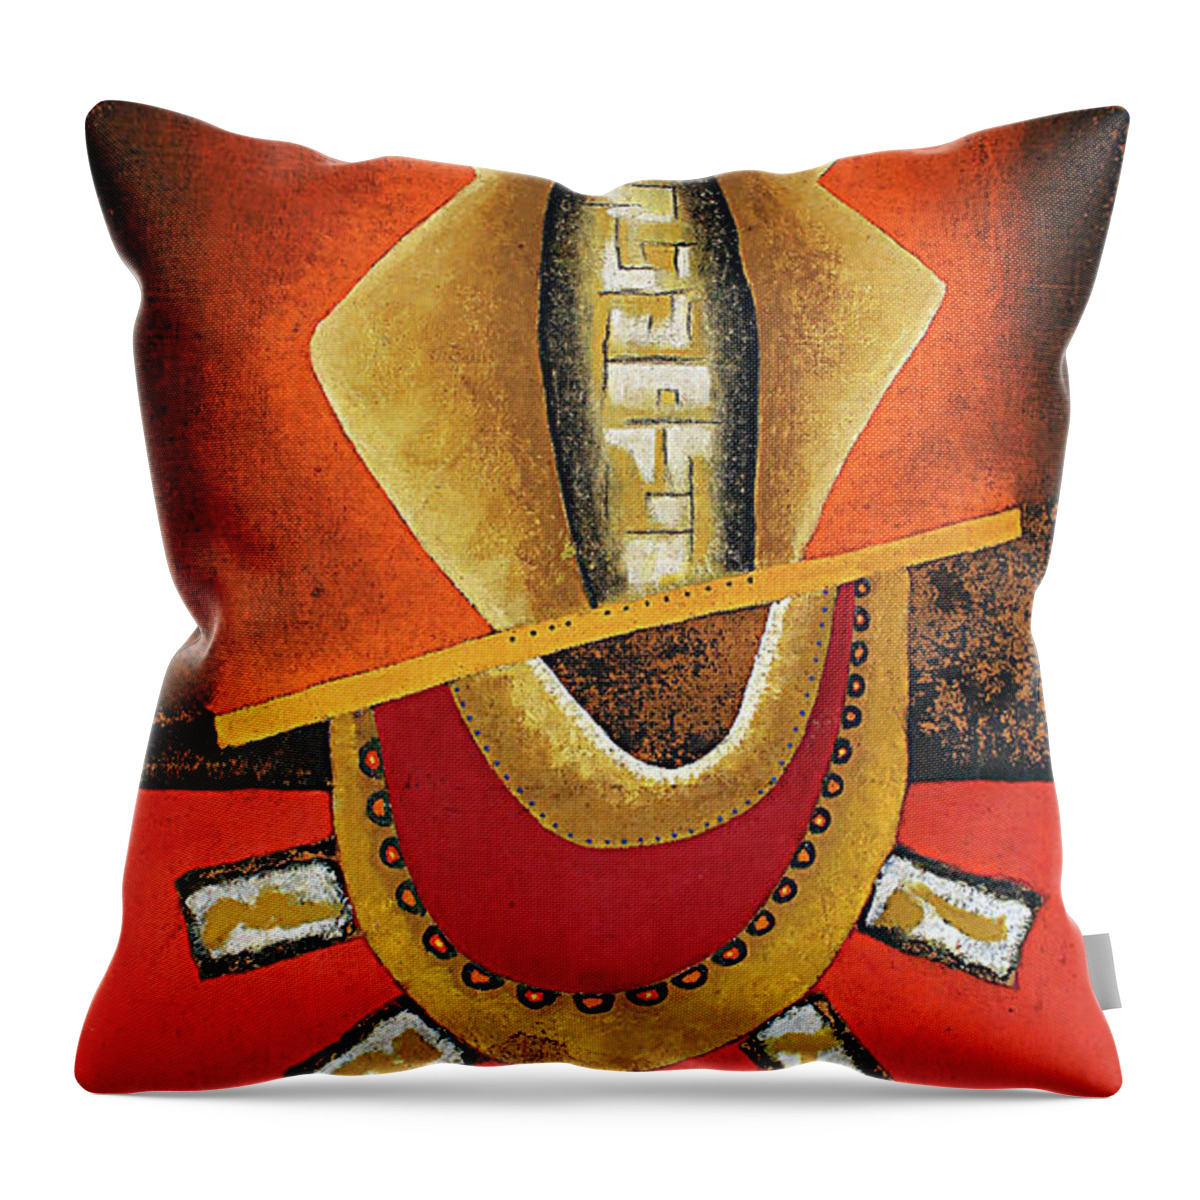 African Throw Pillow featuring the painting Tribal Man by Michael Nene